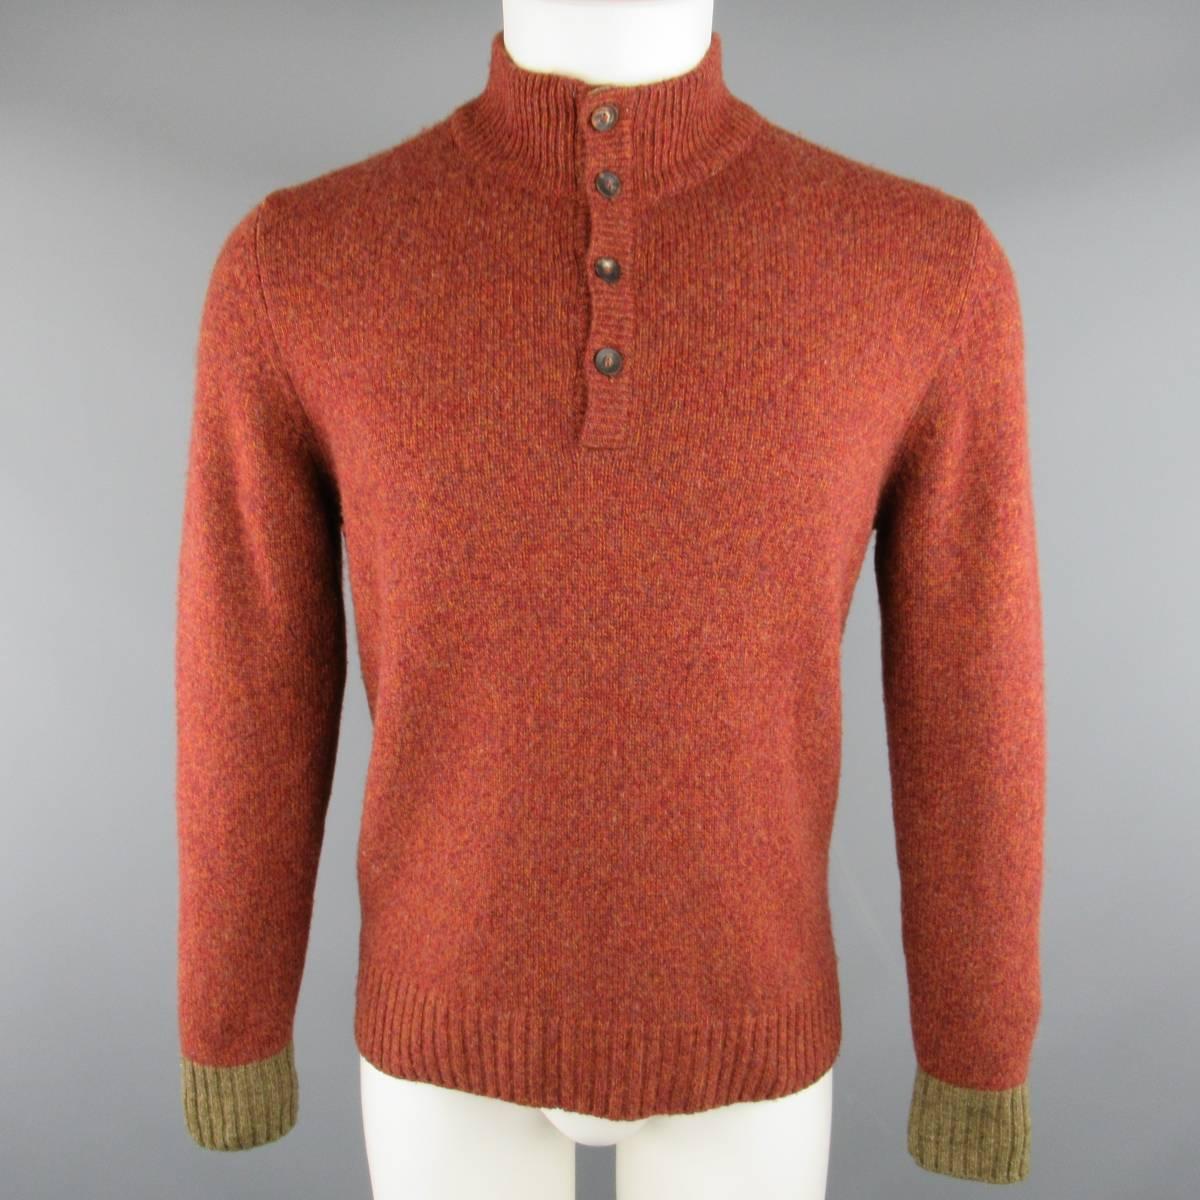 LORO PIANA pullover sweater comes in a brick red heather textured cashmere knit and features a high neck collar with half button closure, and moss green cuffs. Made in Italy.
 
Good Pre-Owned Condition.
Marked: IT 46
 
Measurements:
 
Shoulder: 17